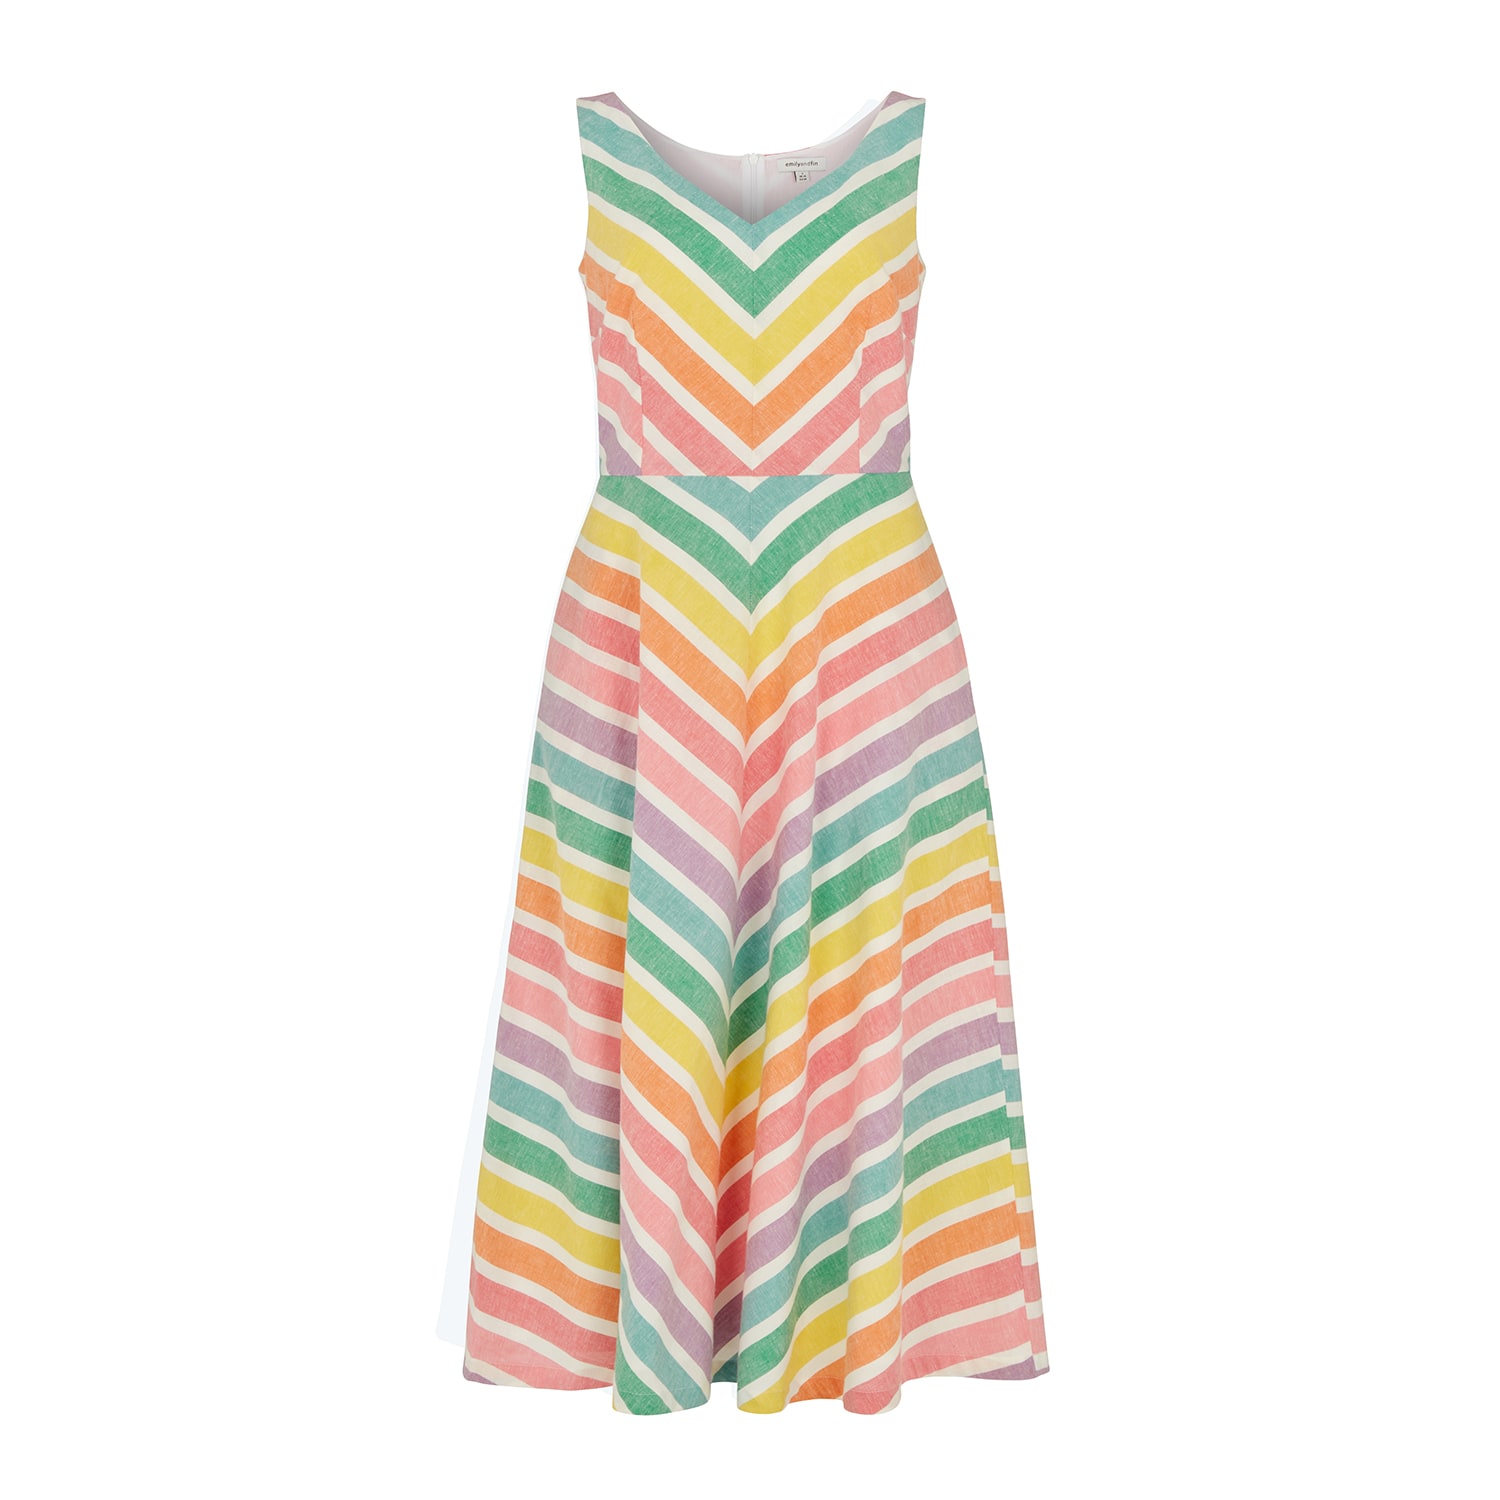 Emily And Fin Women's Margot Over The Rainbow Dress In Multi